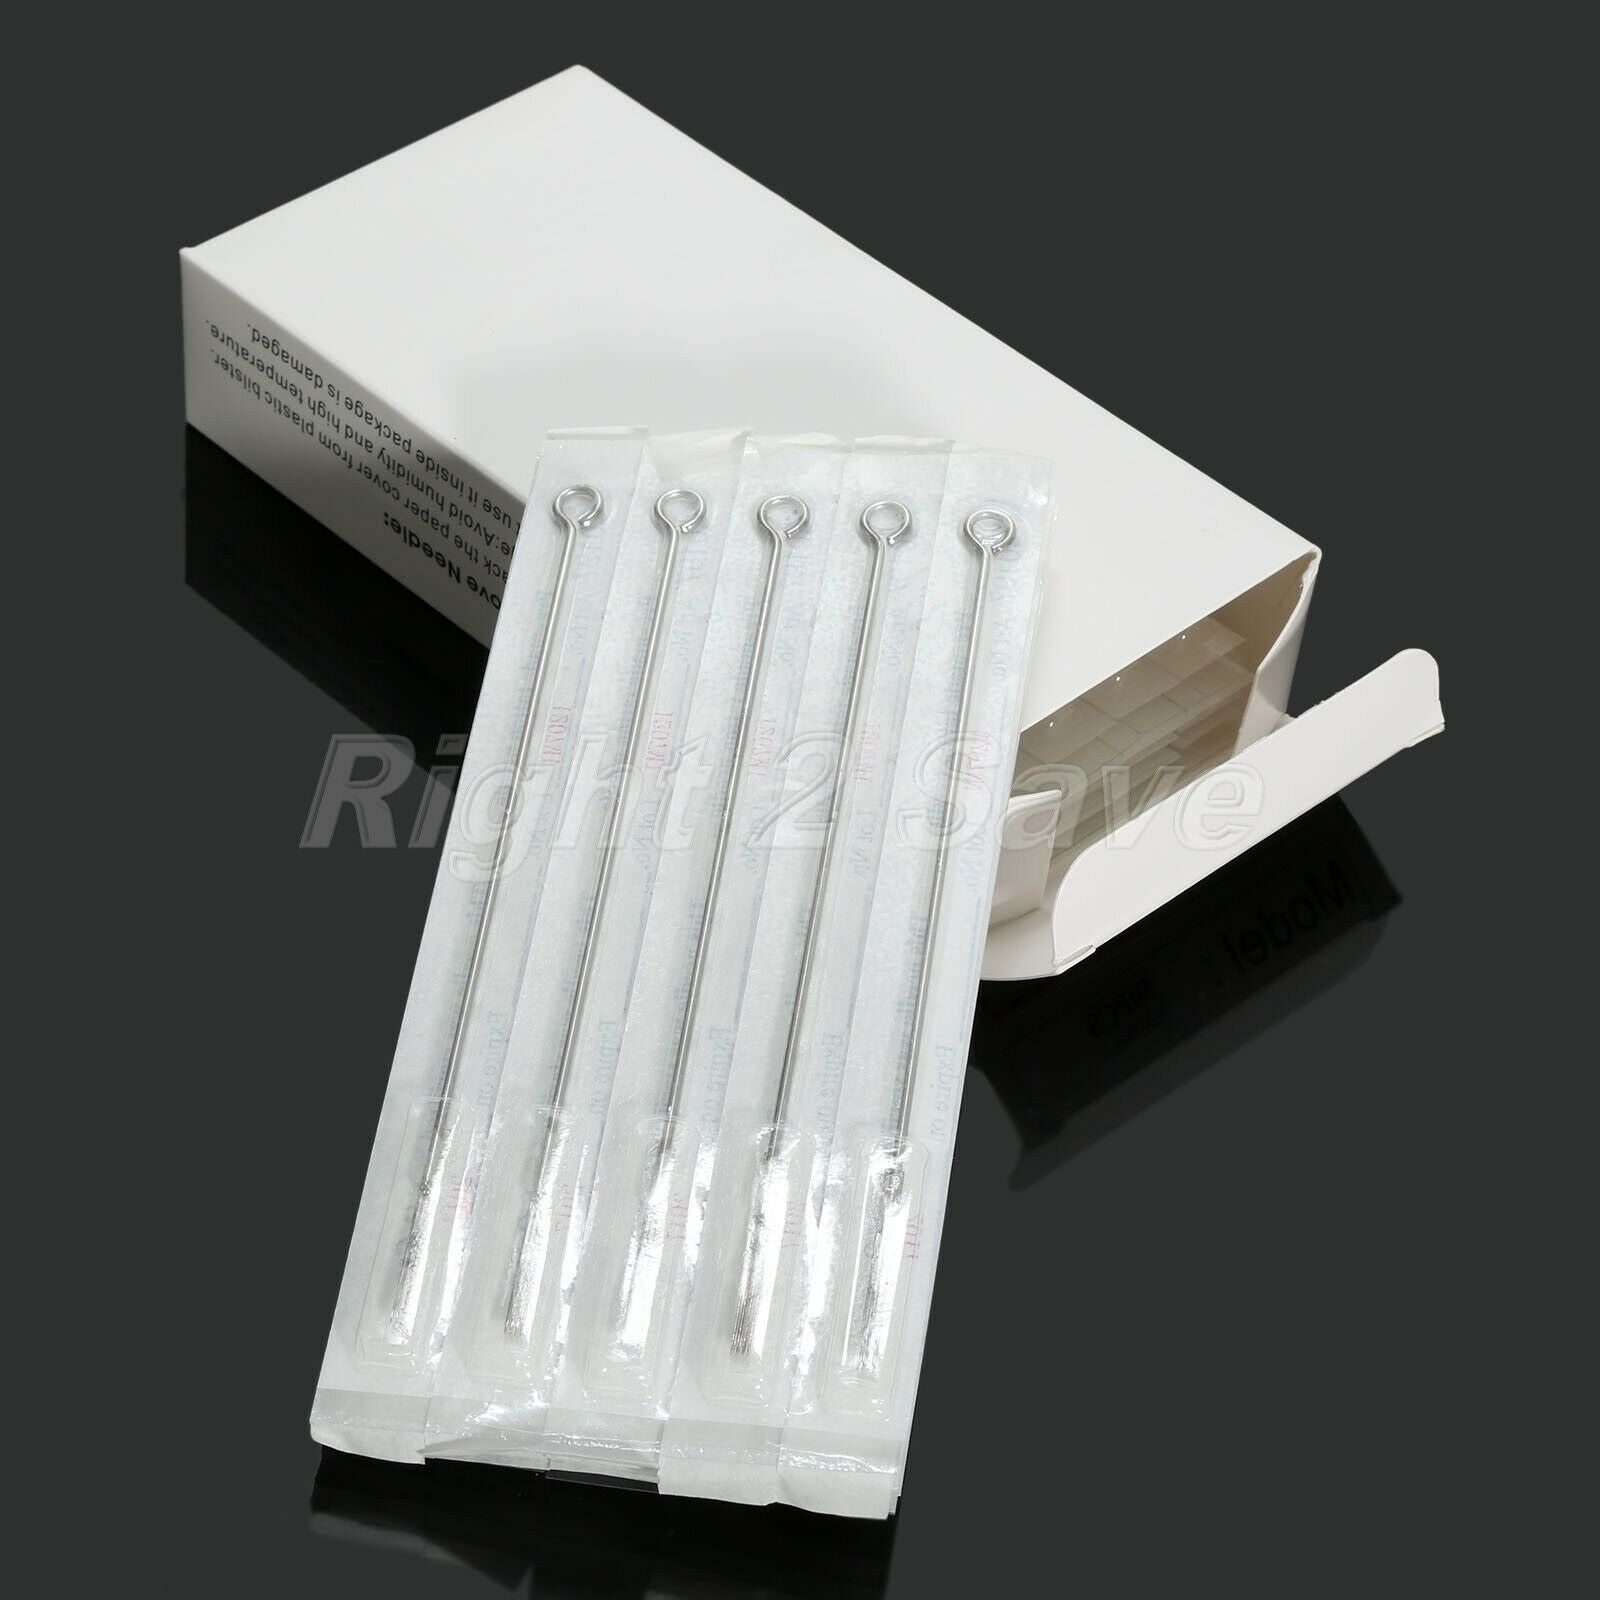 10pcs 7M1 Tattoo Needles Round Liner Sterilized Disposable For Tattoo Machines